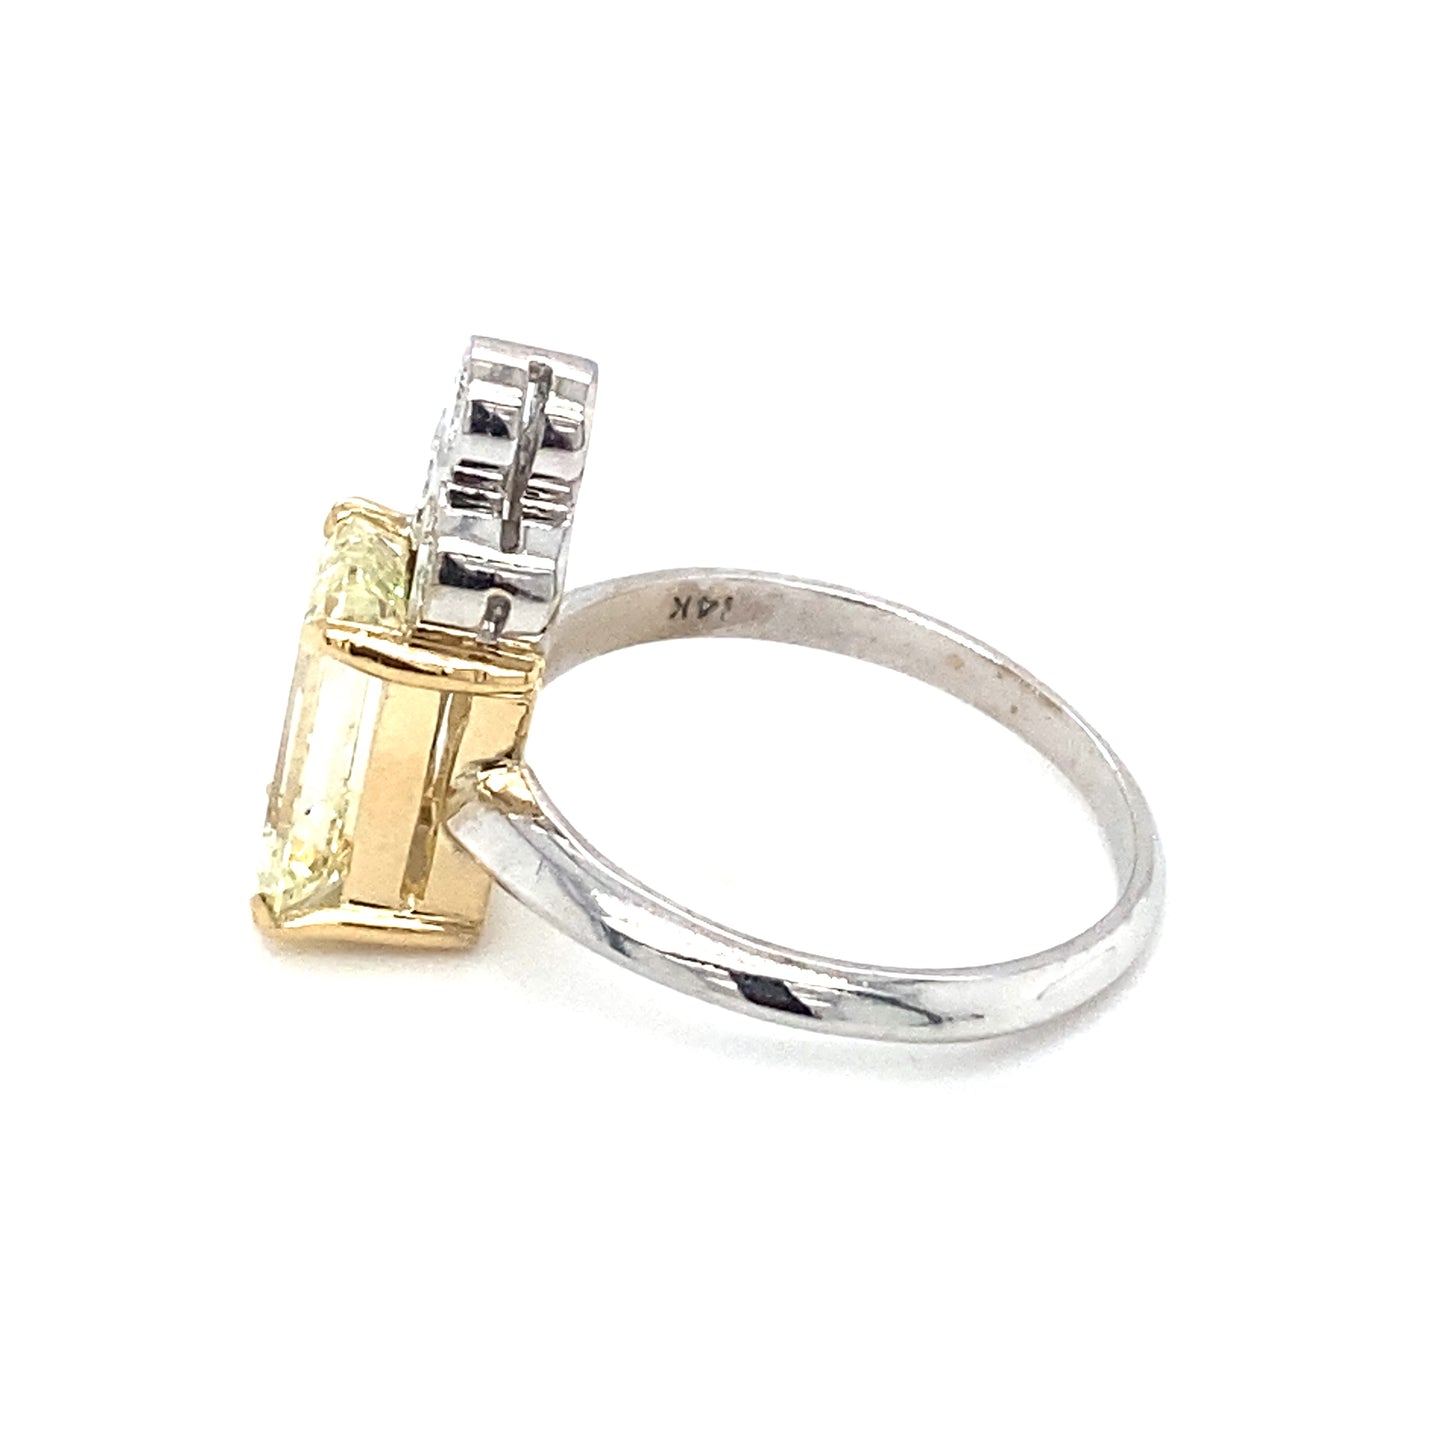 Emerald Cut 2.20ct Diamond Cocktail Ring in 14K White Gold and Platinum